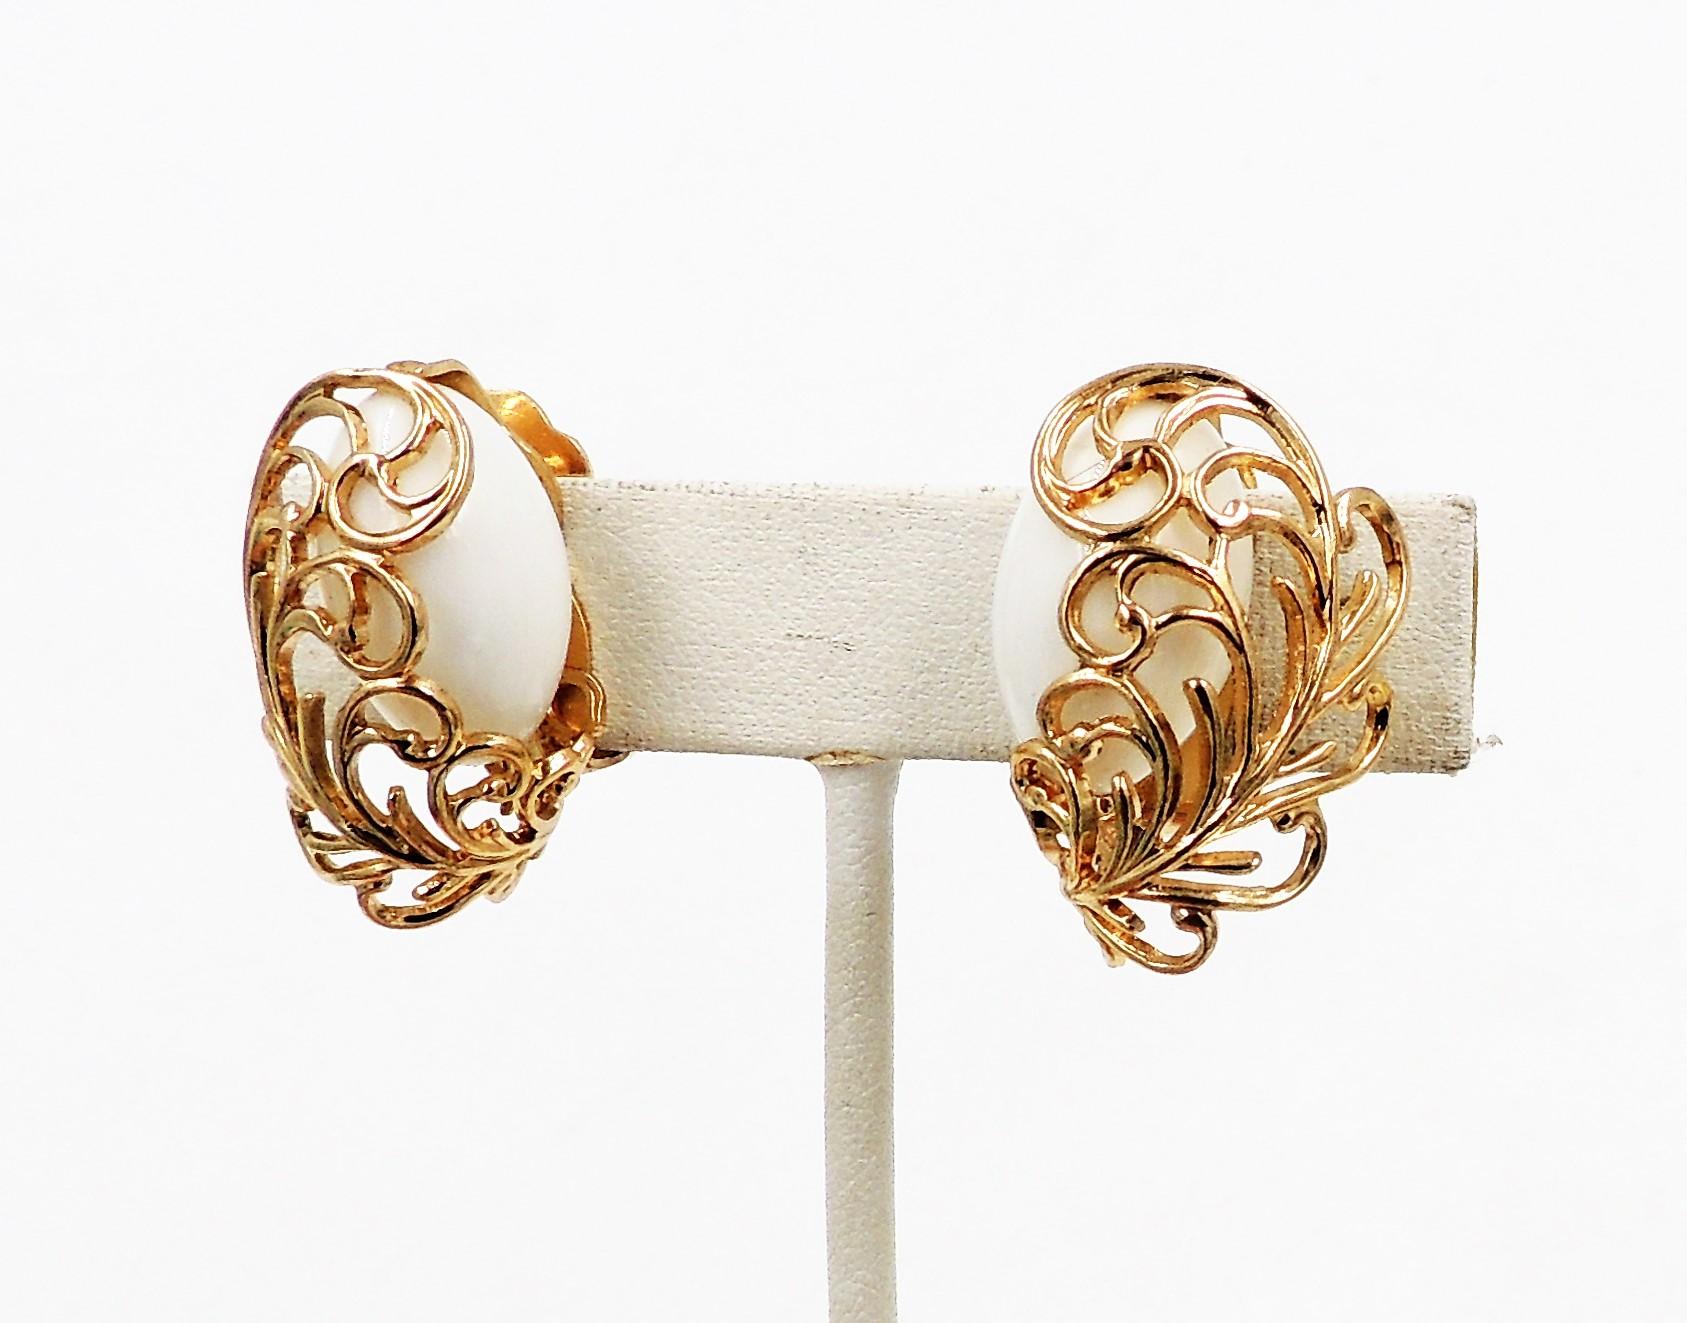 Vintage 1950s Signed Napier Goldtone Filigree White Resin Clip Earrings In Excellent Condition For Sale In Easton, PA